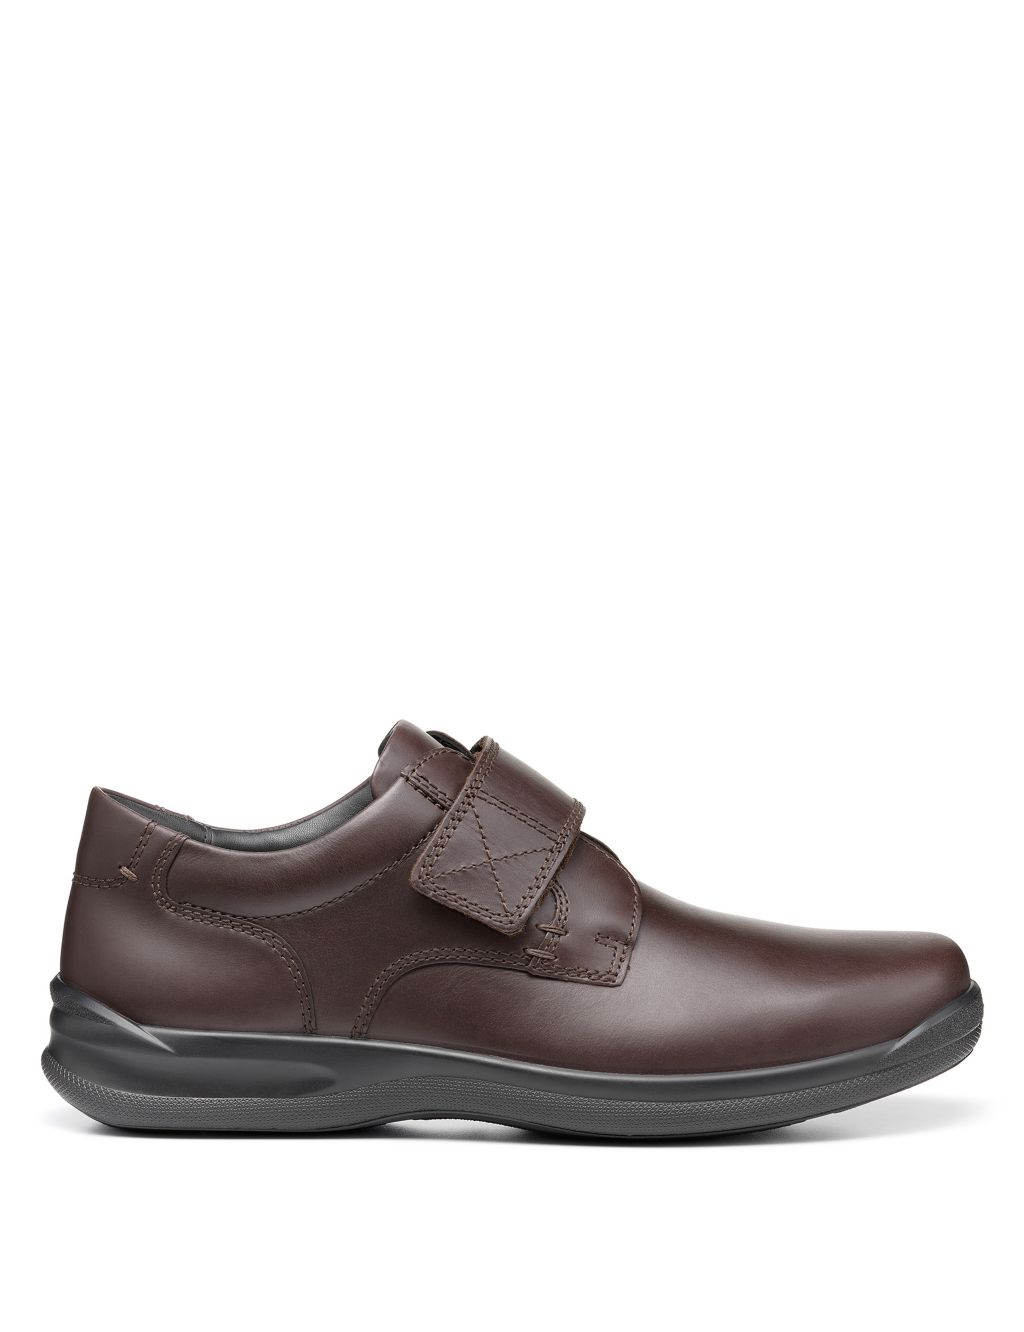 Sedgwick II Leather Derby Shoes image 1